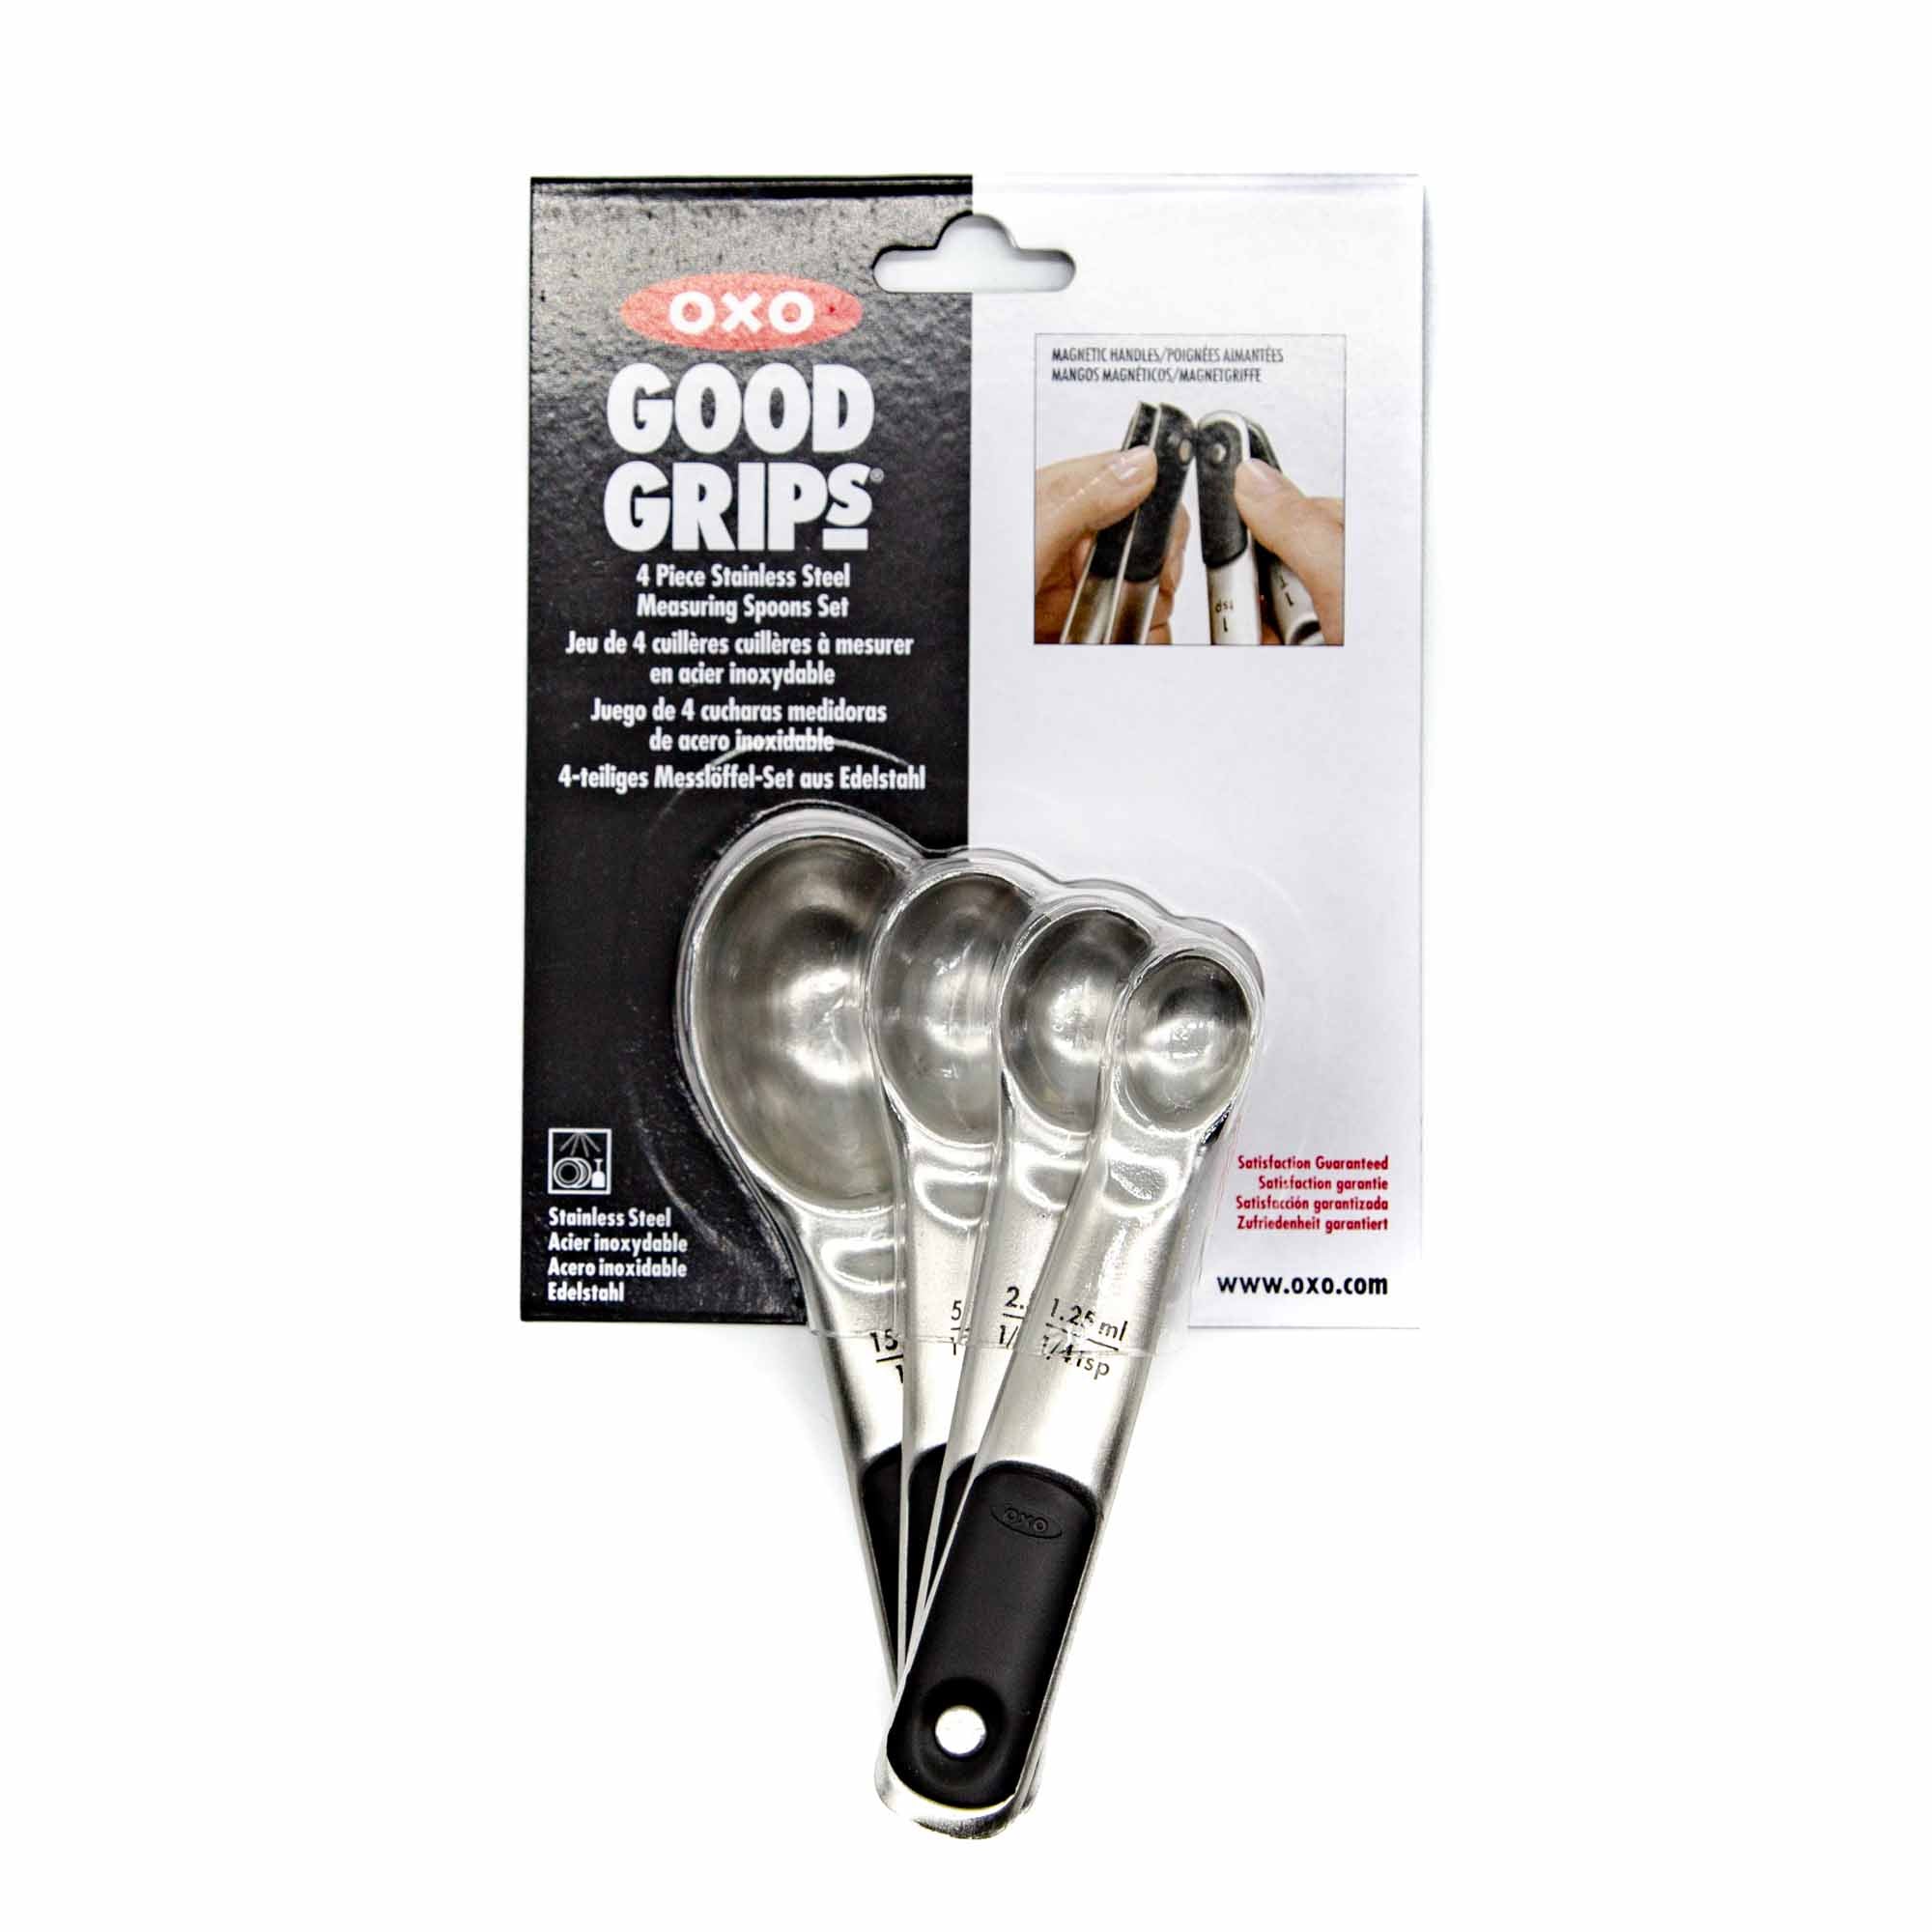 OXO Good Grips Stainless Steel Measuring Spoon Set - Mortise And Tenon